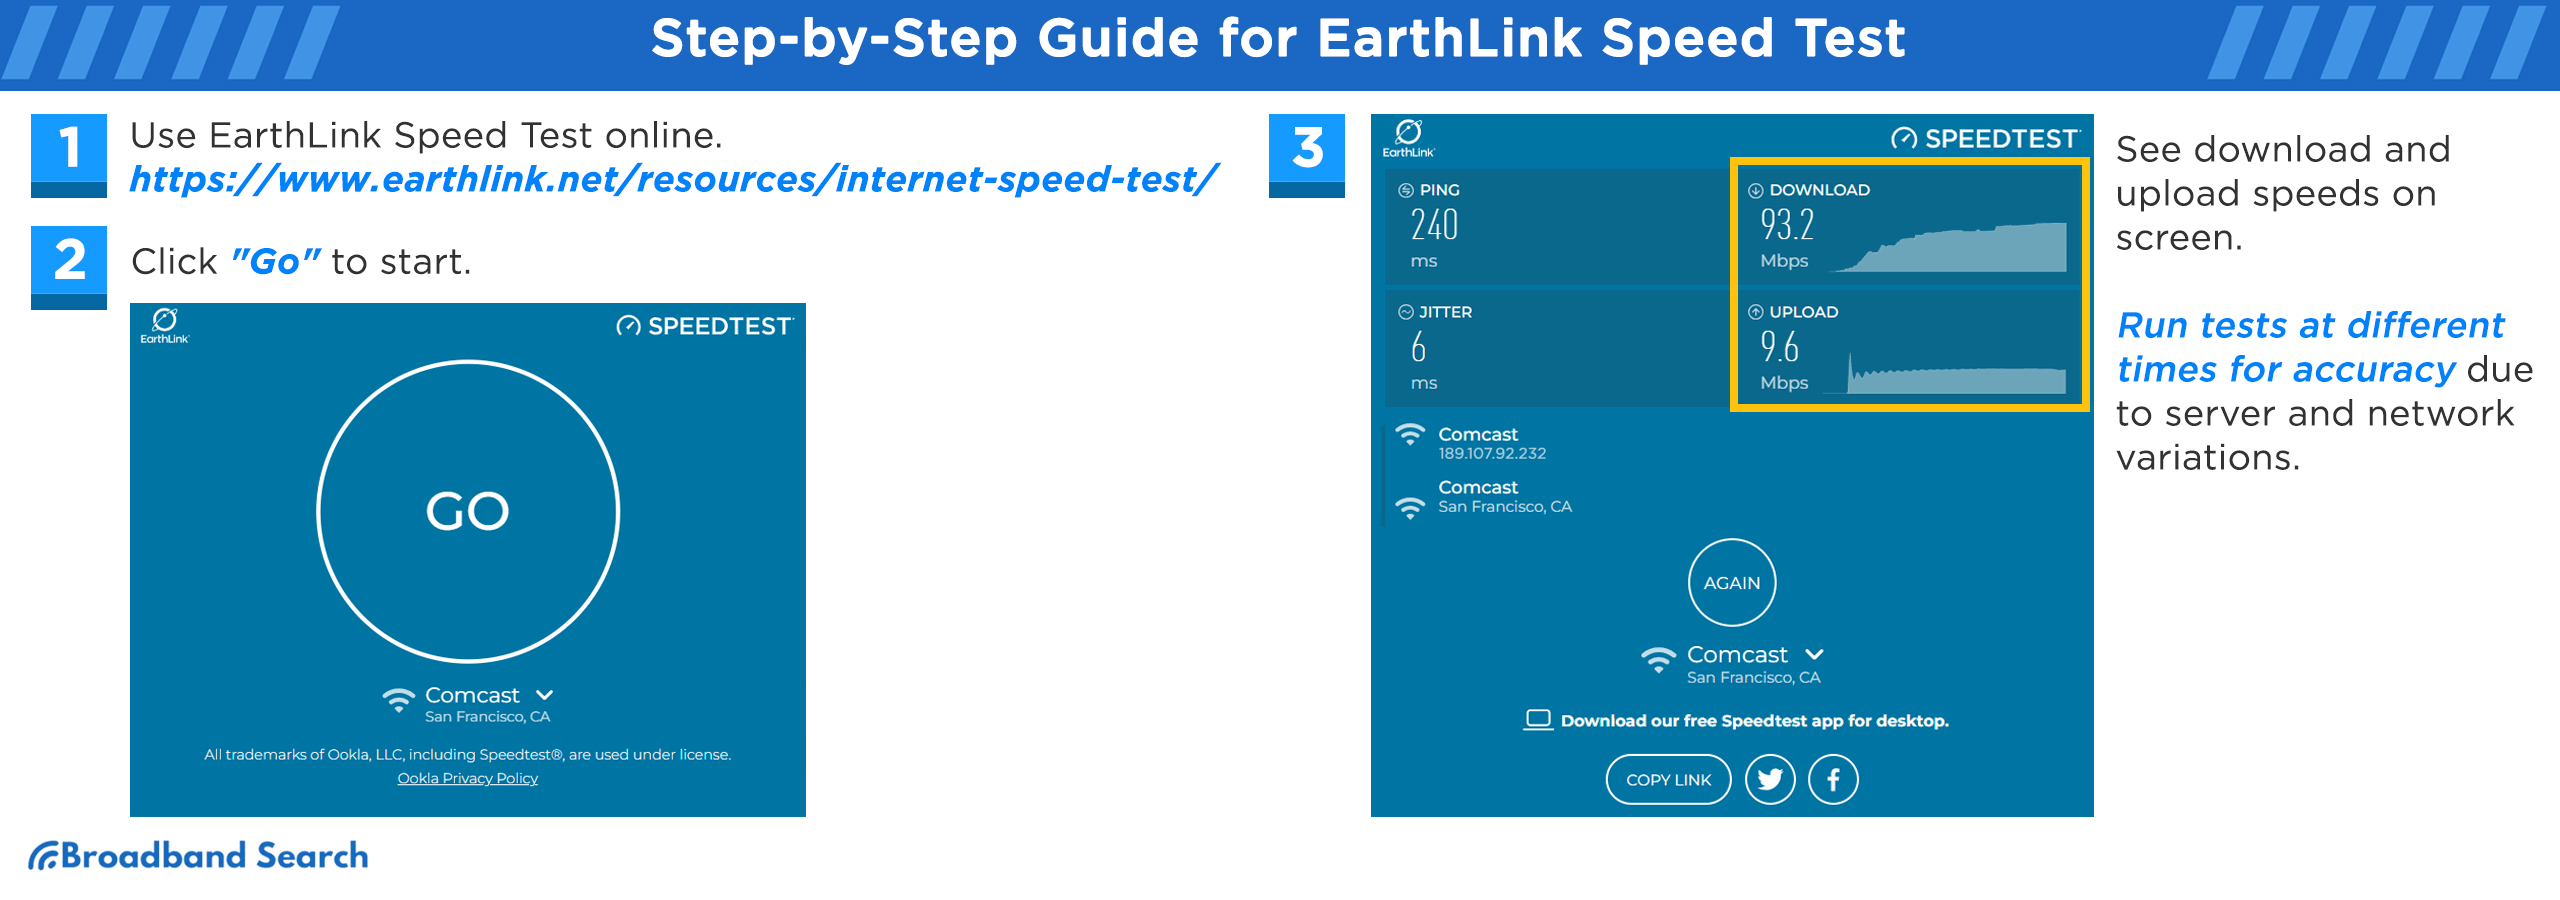 Step by step guide for earthlink's speed test